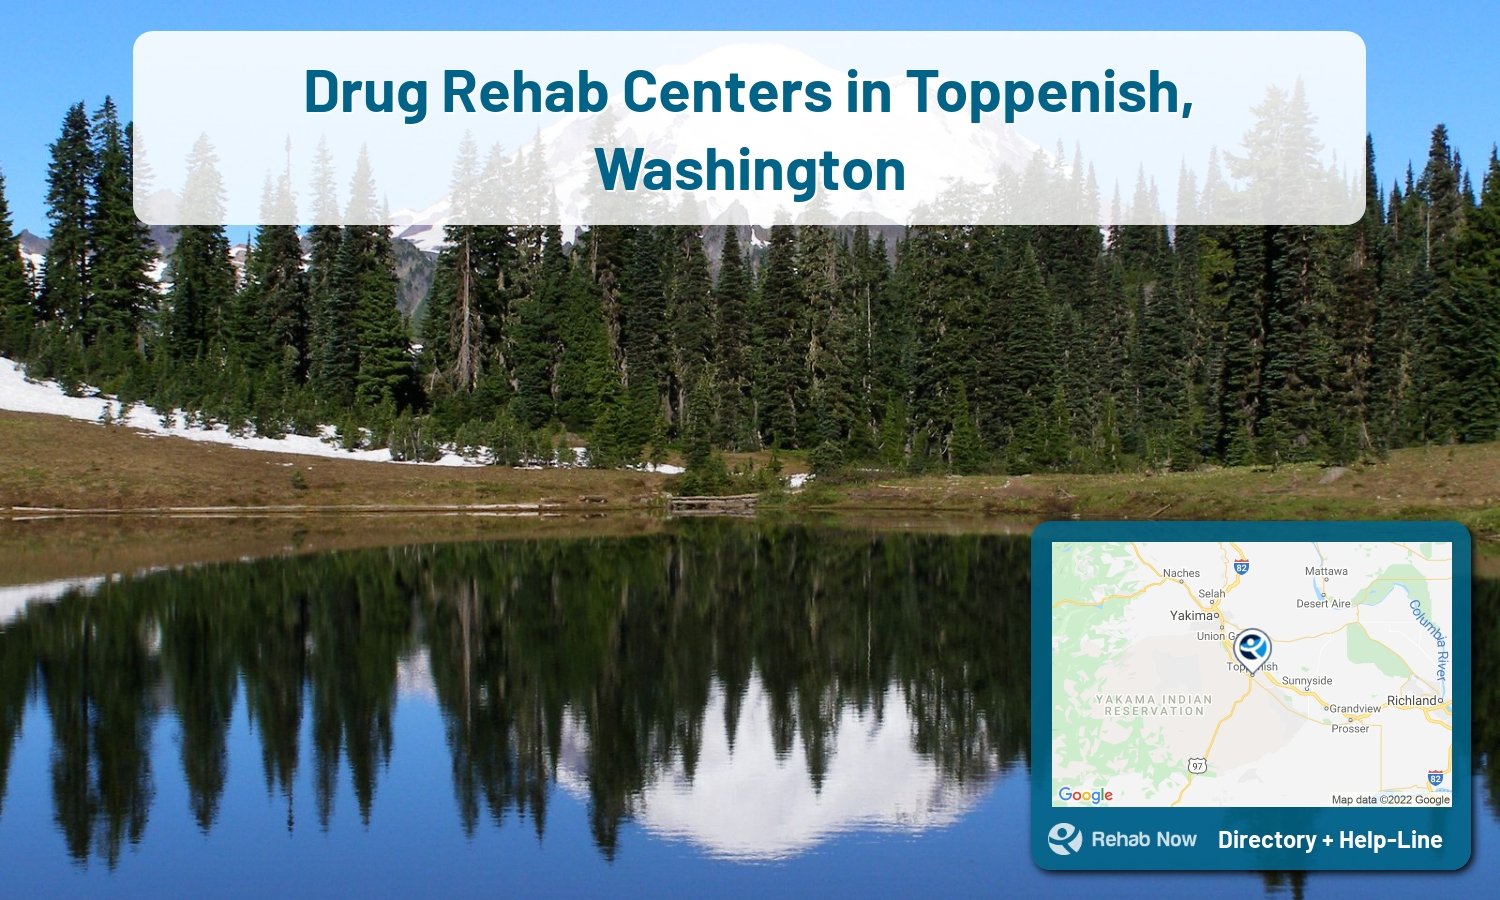 Let our expert counselors help find the best addiction treatment in Toppenish, Washington now with a free call to our hotline.